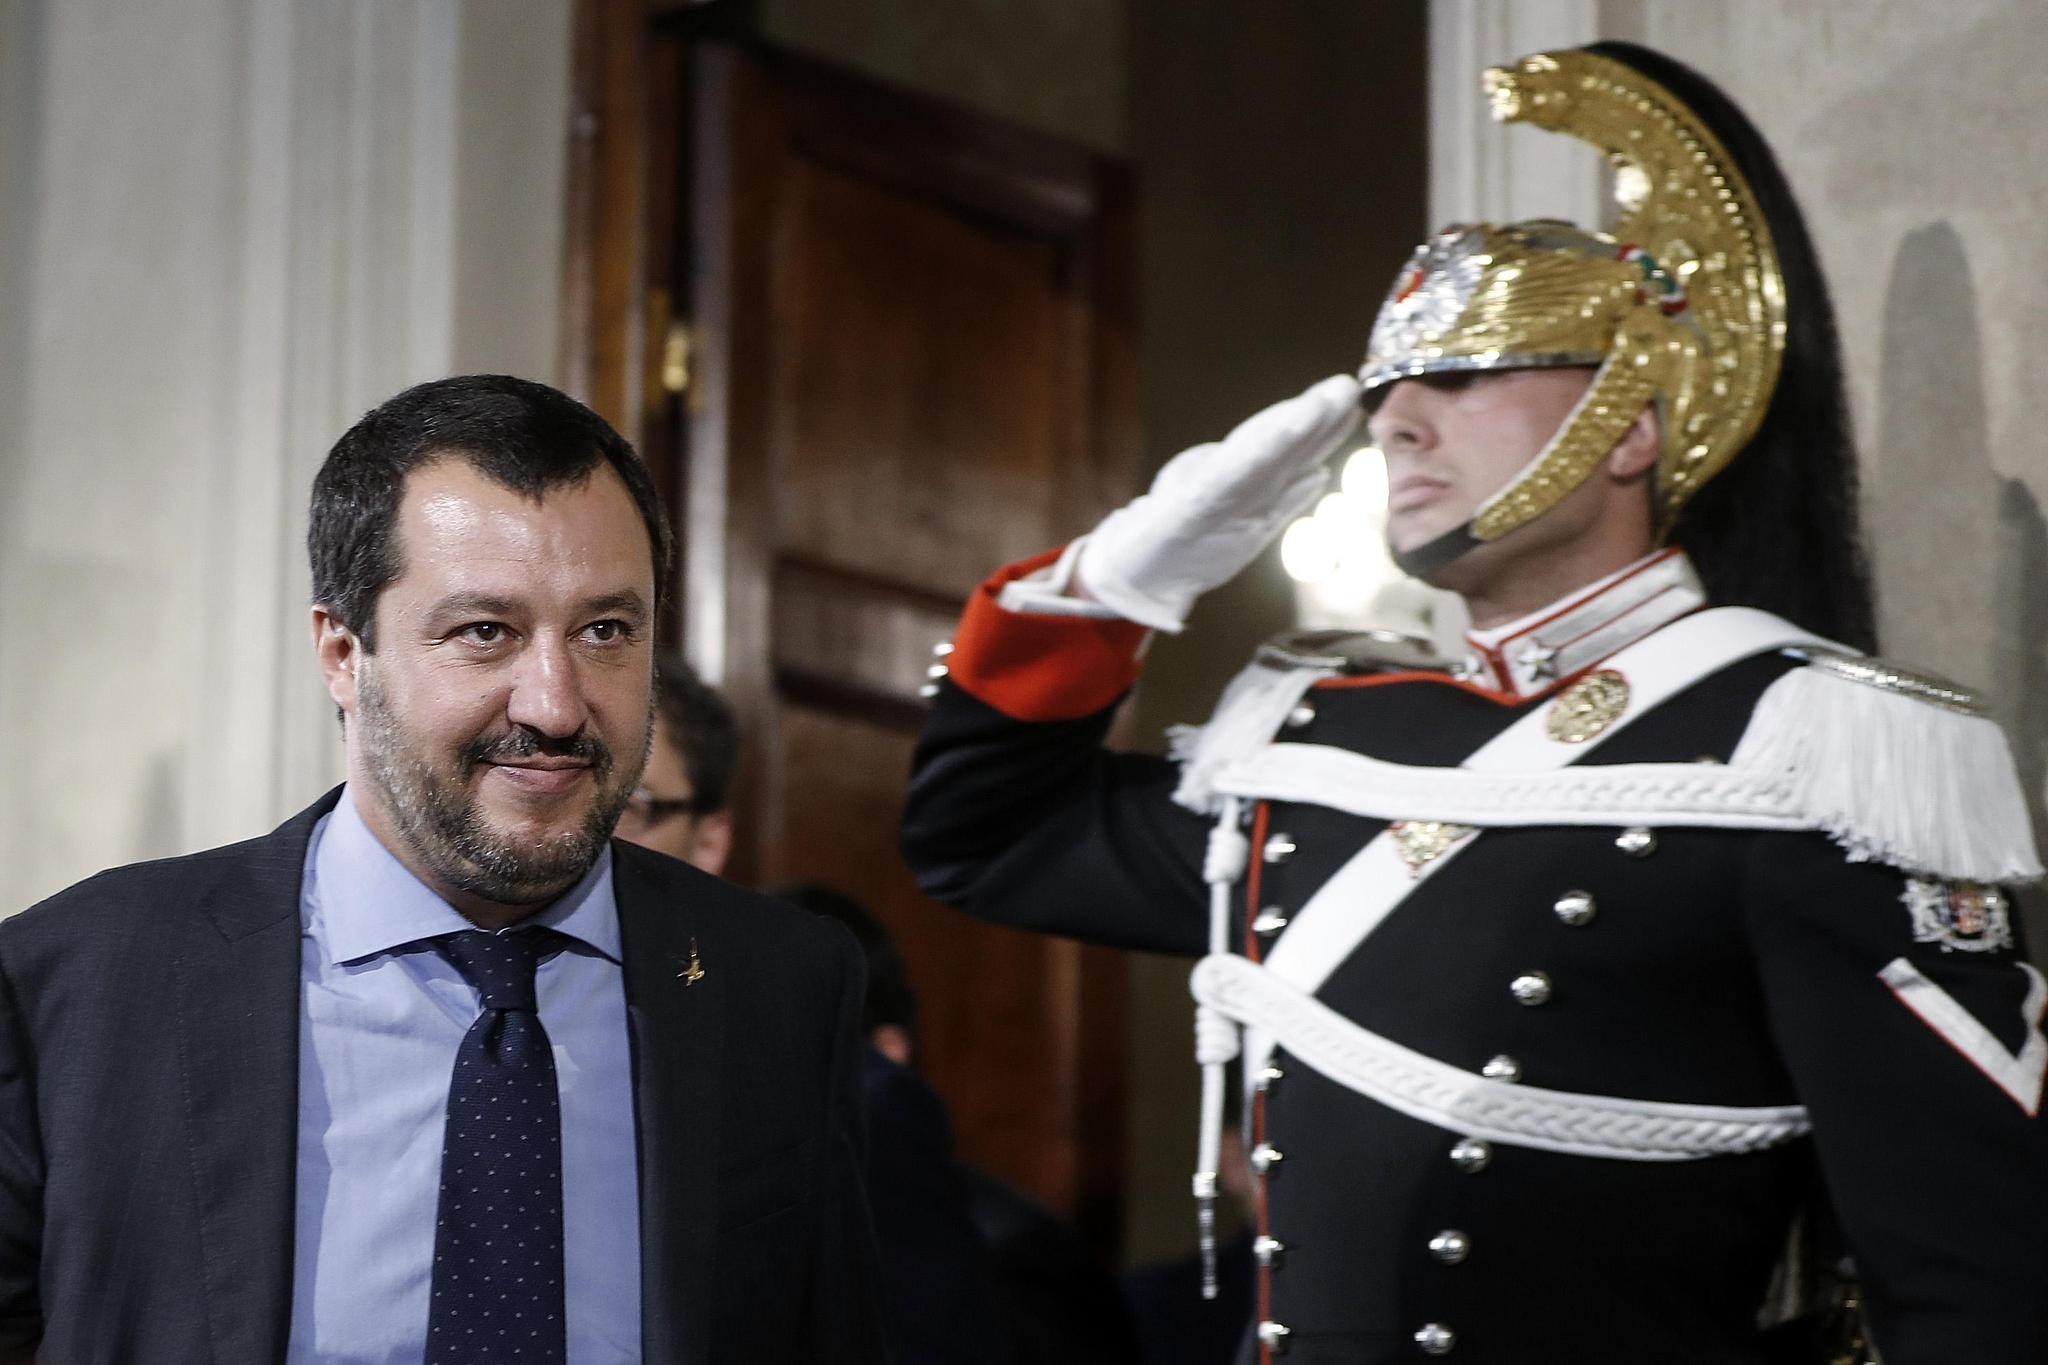 Leader of the League party, Matteo Salvini, arrives to address the media after meeting with Italian President Sergio Mattarella, at the Quirinale presidential palace, Rome, May 14.